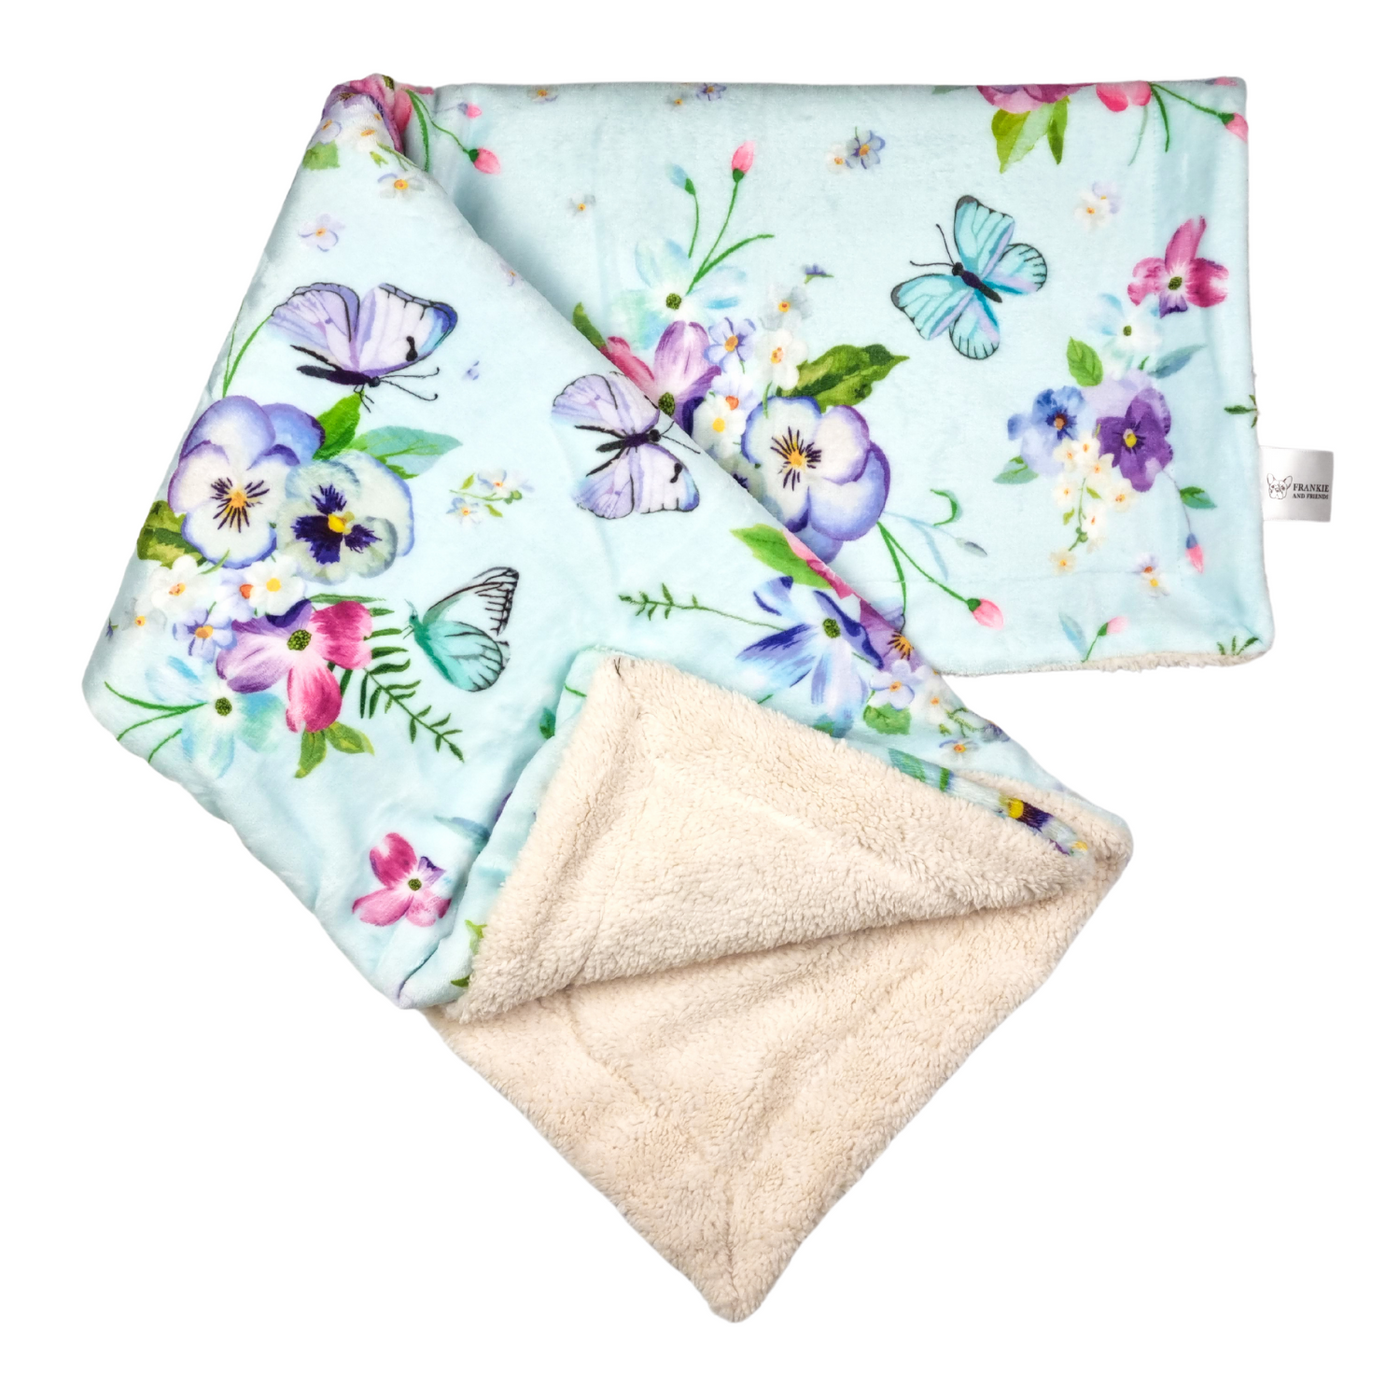 Spring Butterfly - Extra Soft Pet Blanket